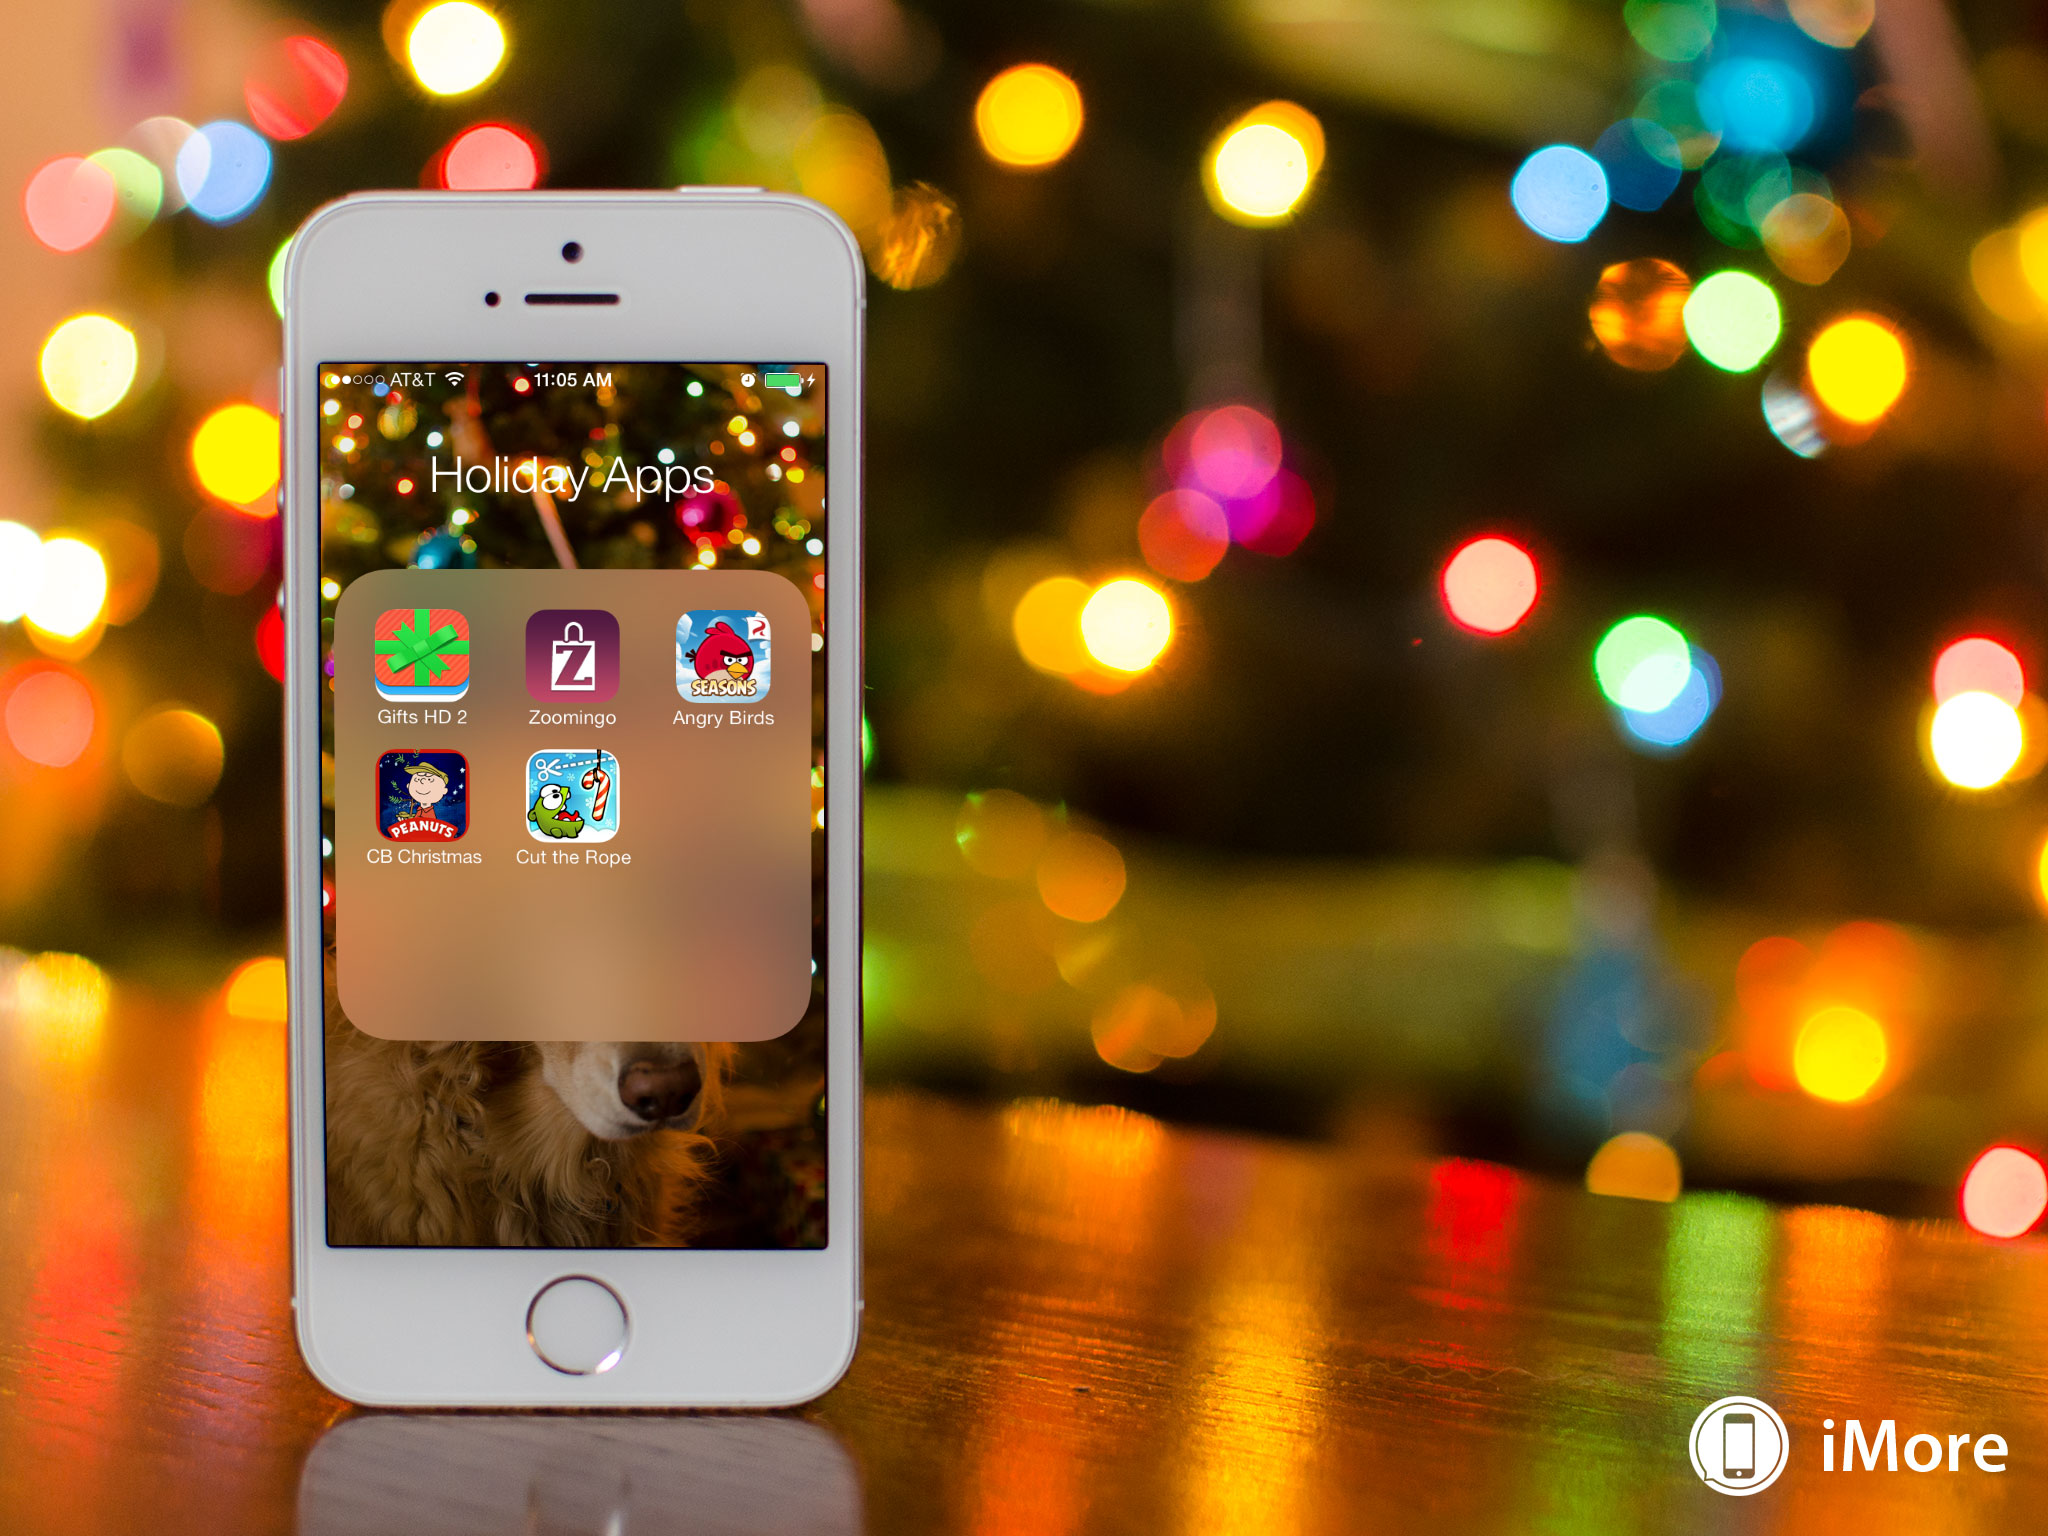 Best apps and games to celebrate the holiday season: Gifts HD 2, Cut the Rope, Angry Birds, and more! 